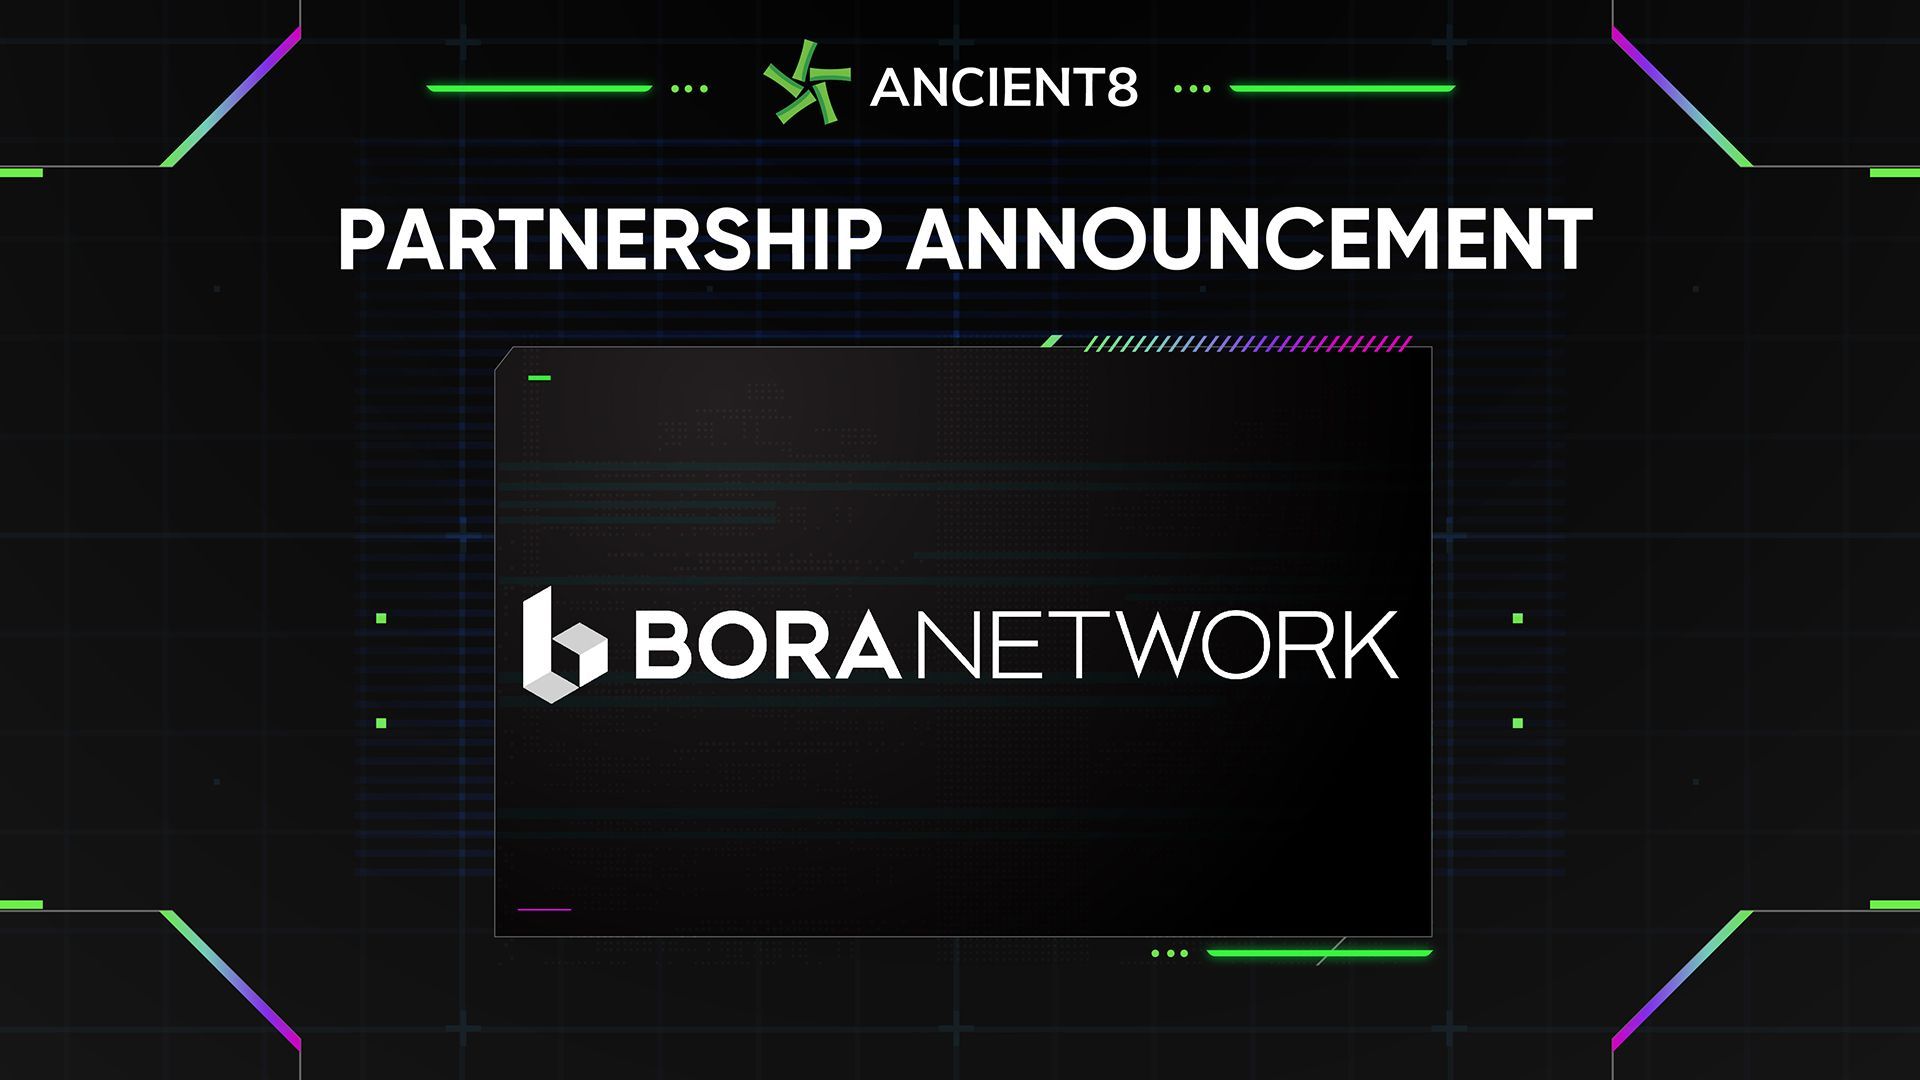 Ancient8 collaborates with BORANETWORK, a platform that provides friendly blockchain-based games and entertainment content